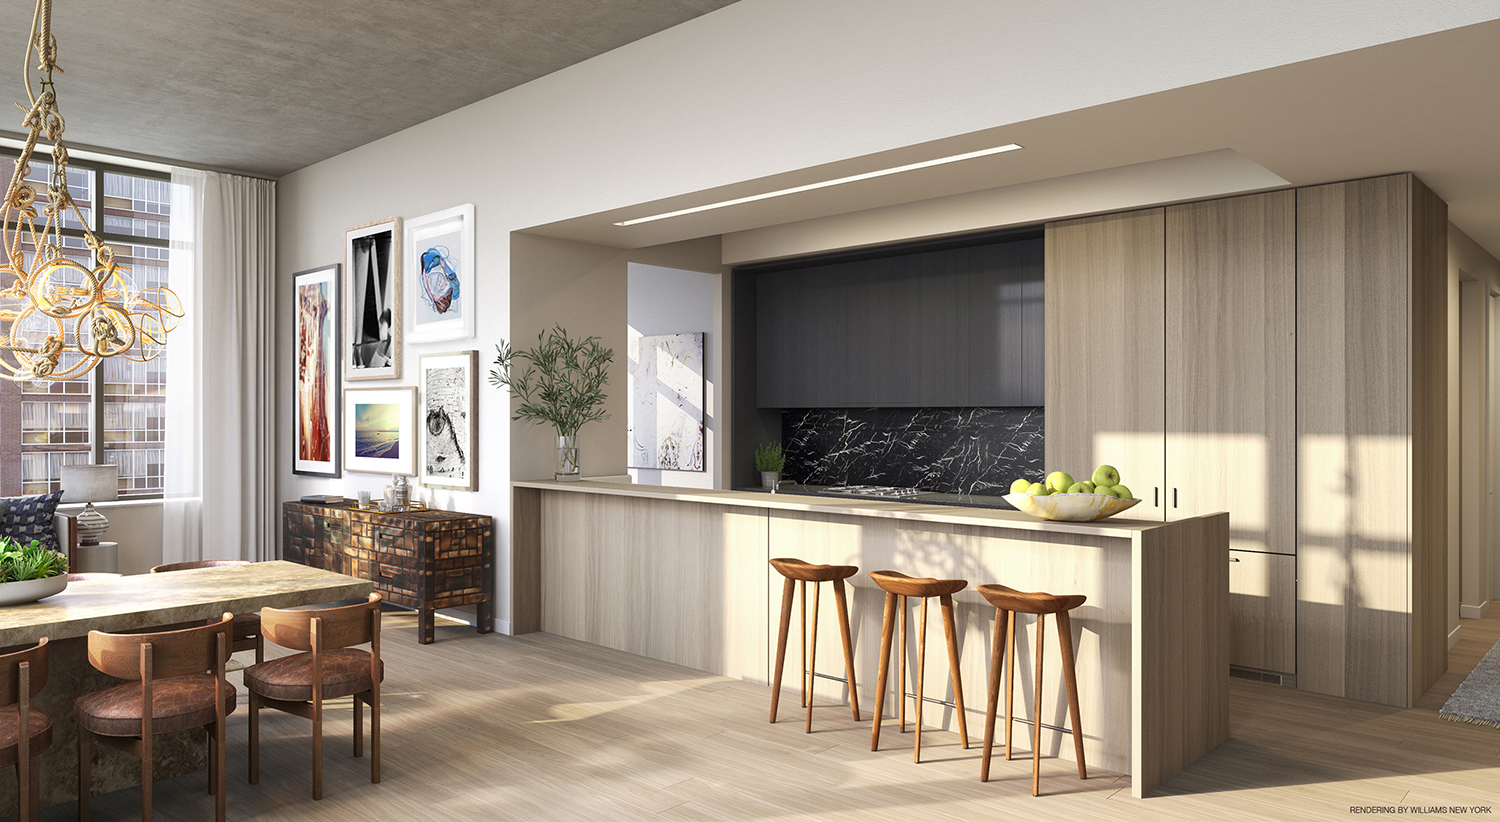 Rendering of a kitchen at 196 Orchard Street. Credit: Williams New York